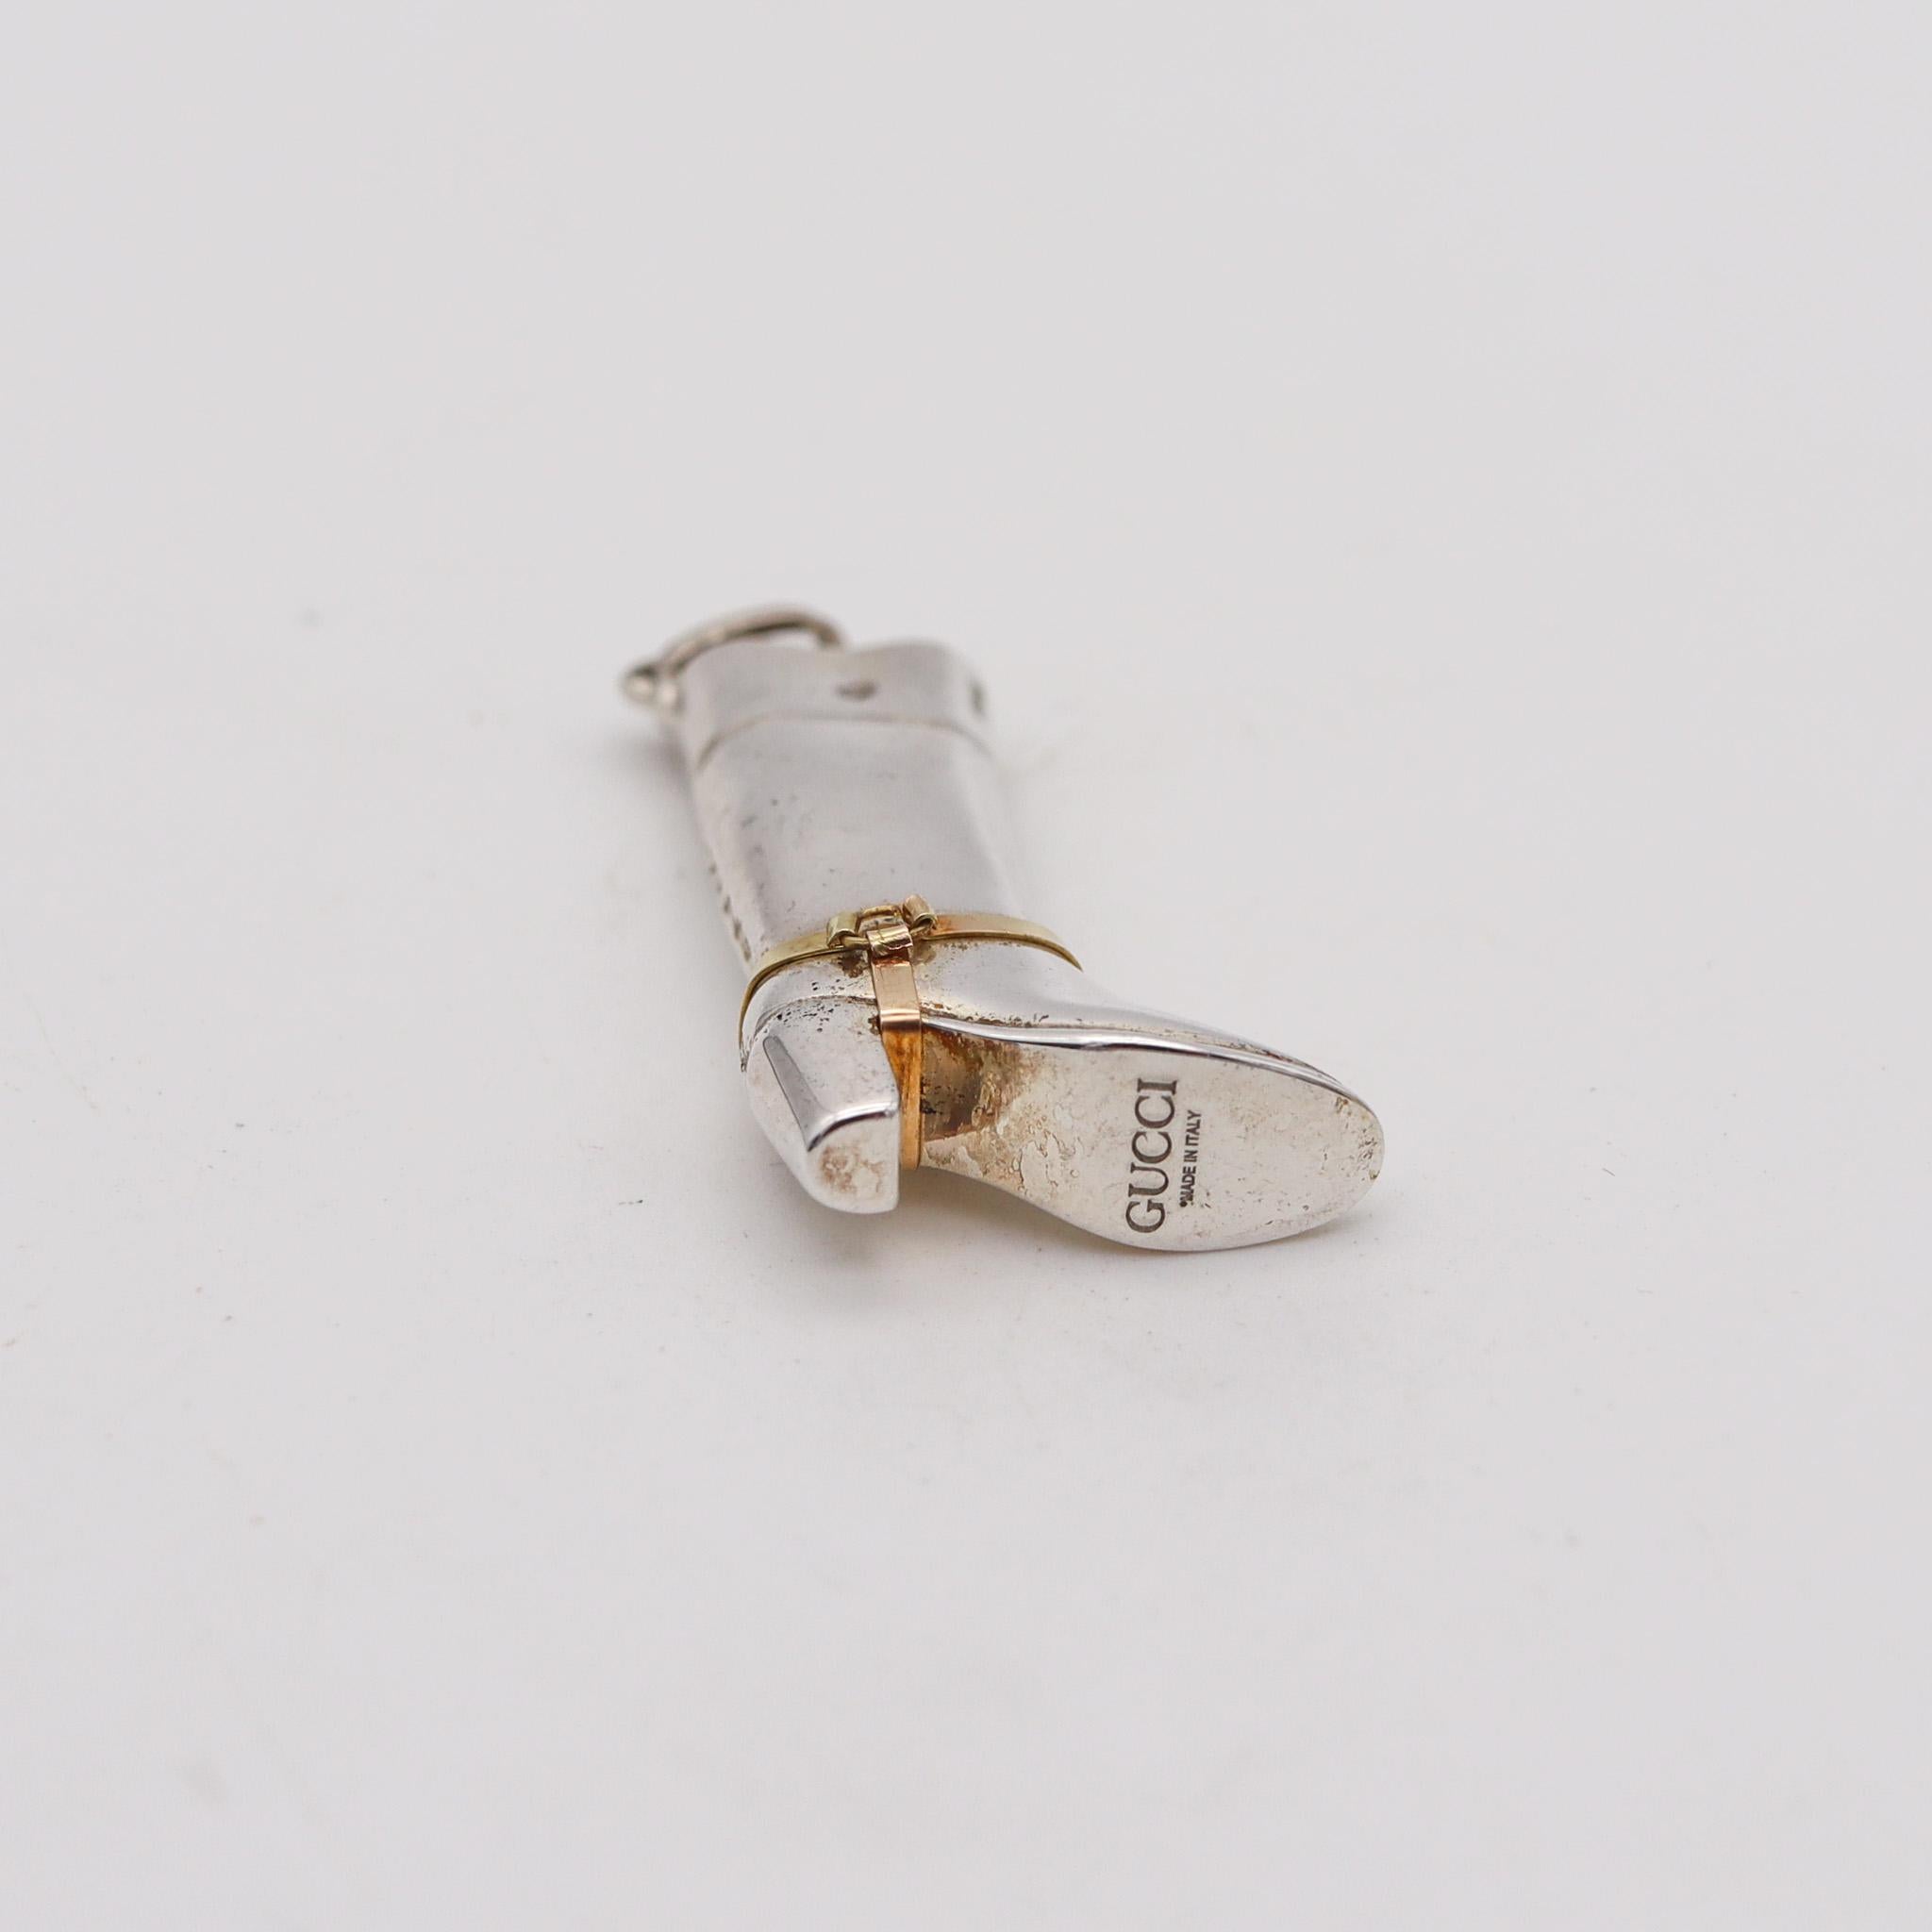 GUCCI 1980 Firenze High Boot Pendant Charm in Solid .925 Sterling 18Kt Gold In Fair Condition For Sale In Miami, FL